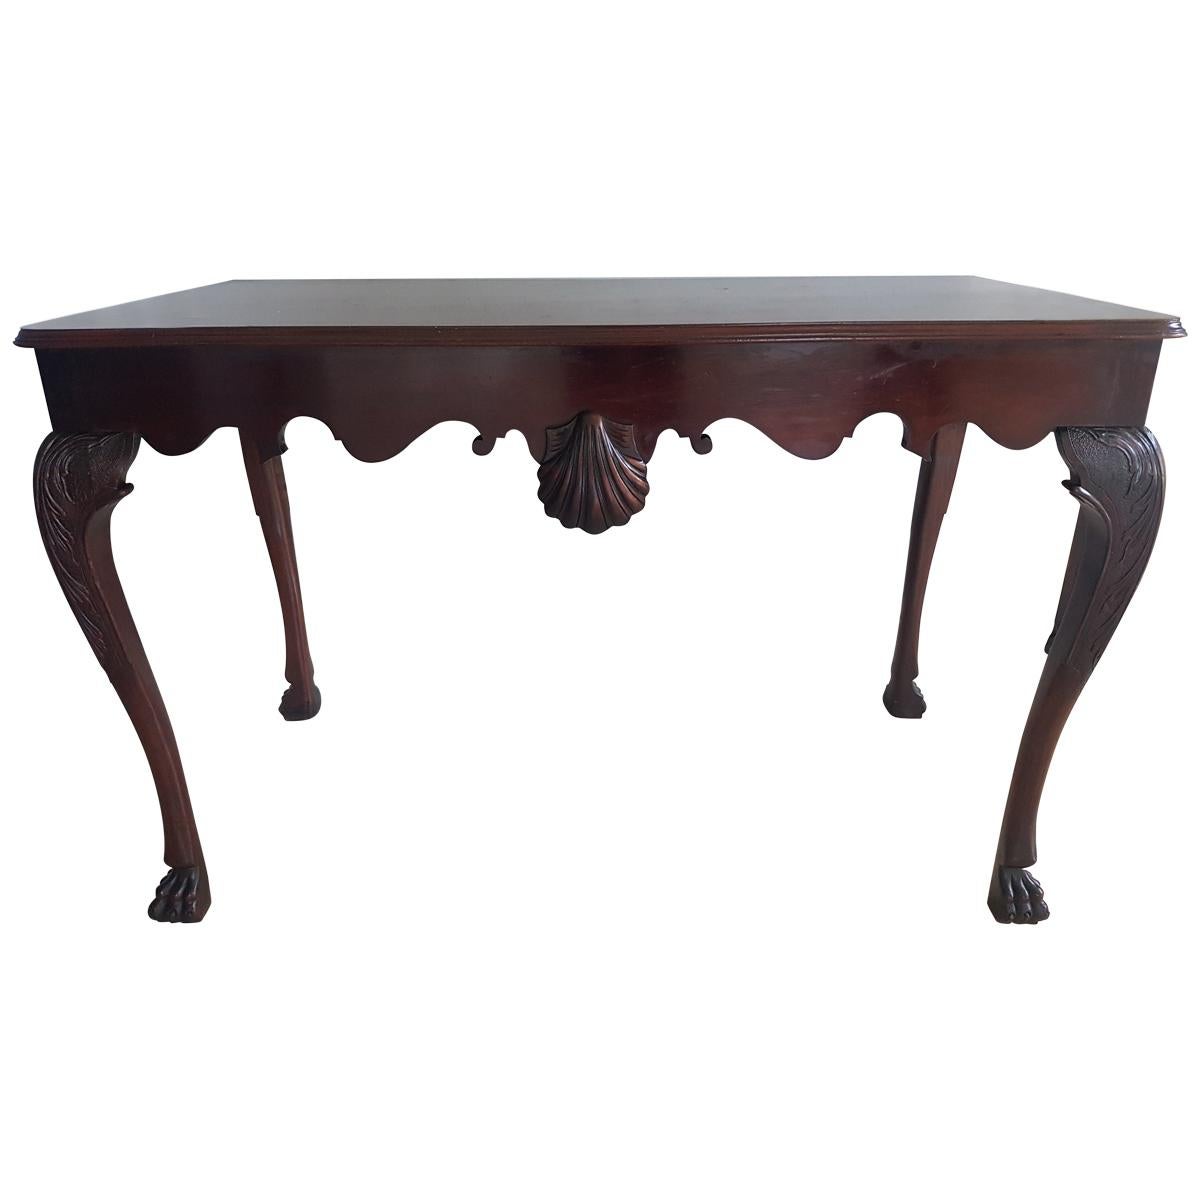 Irish 19th Century Finely Carved Mahogany Side Table Attributed to James Hicks For Sale